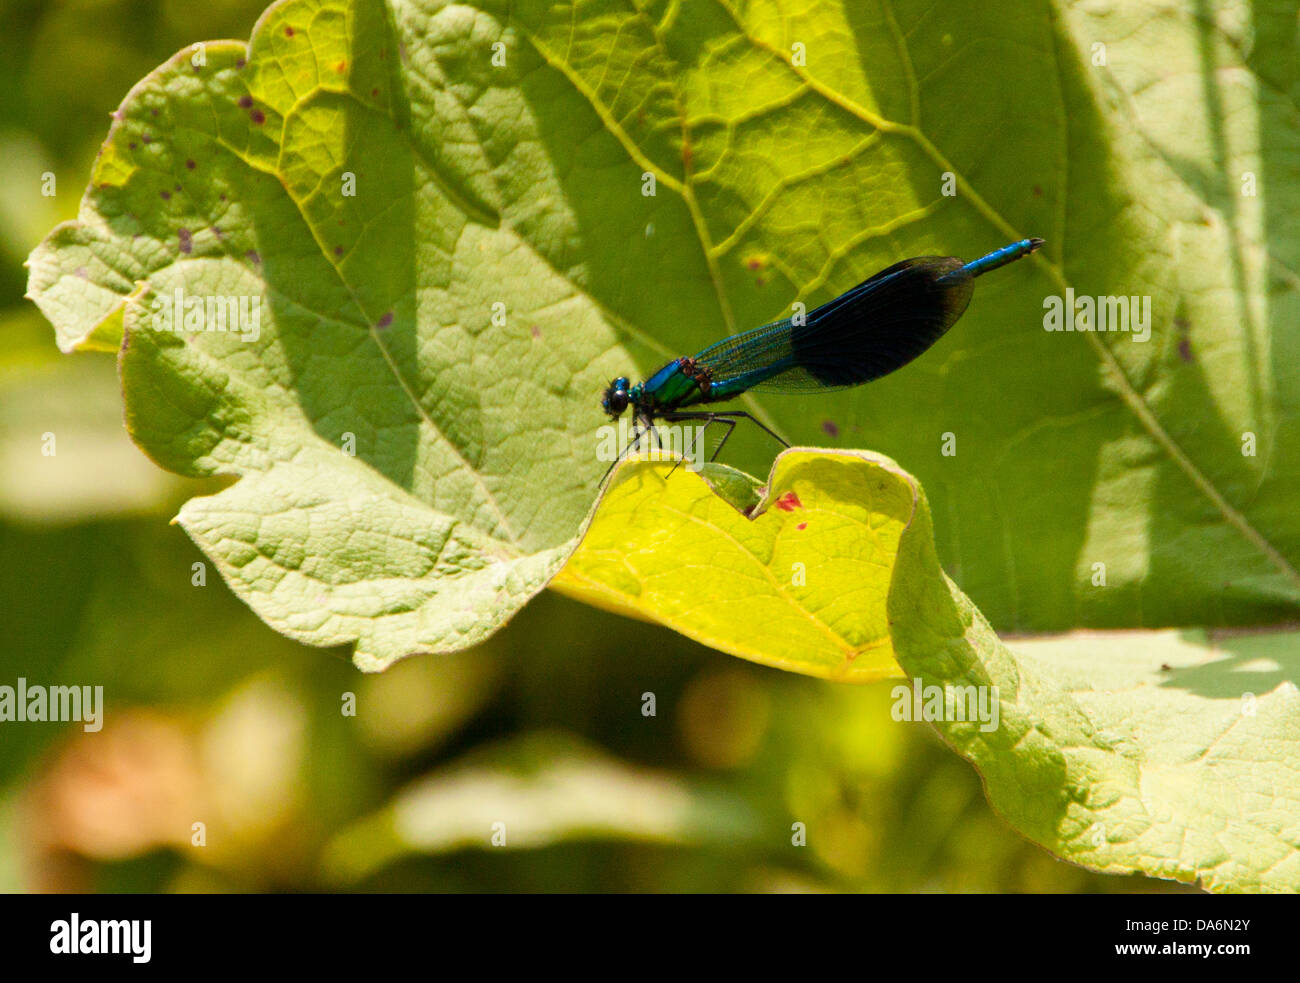 Male Banded Demoiselle Fly - Calopteryx splendens - Family Calopterygidae part of the Suborder Zygoptera... Stock Photo